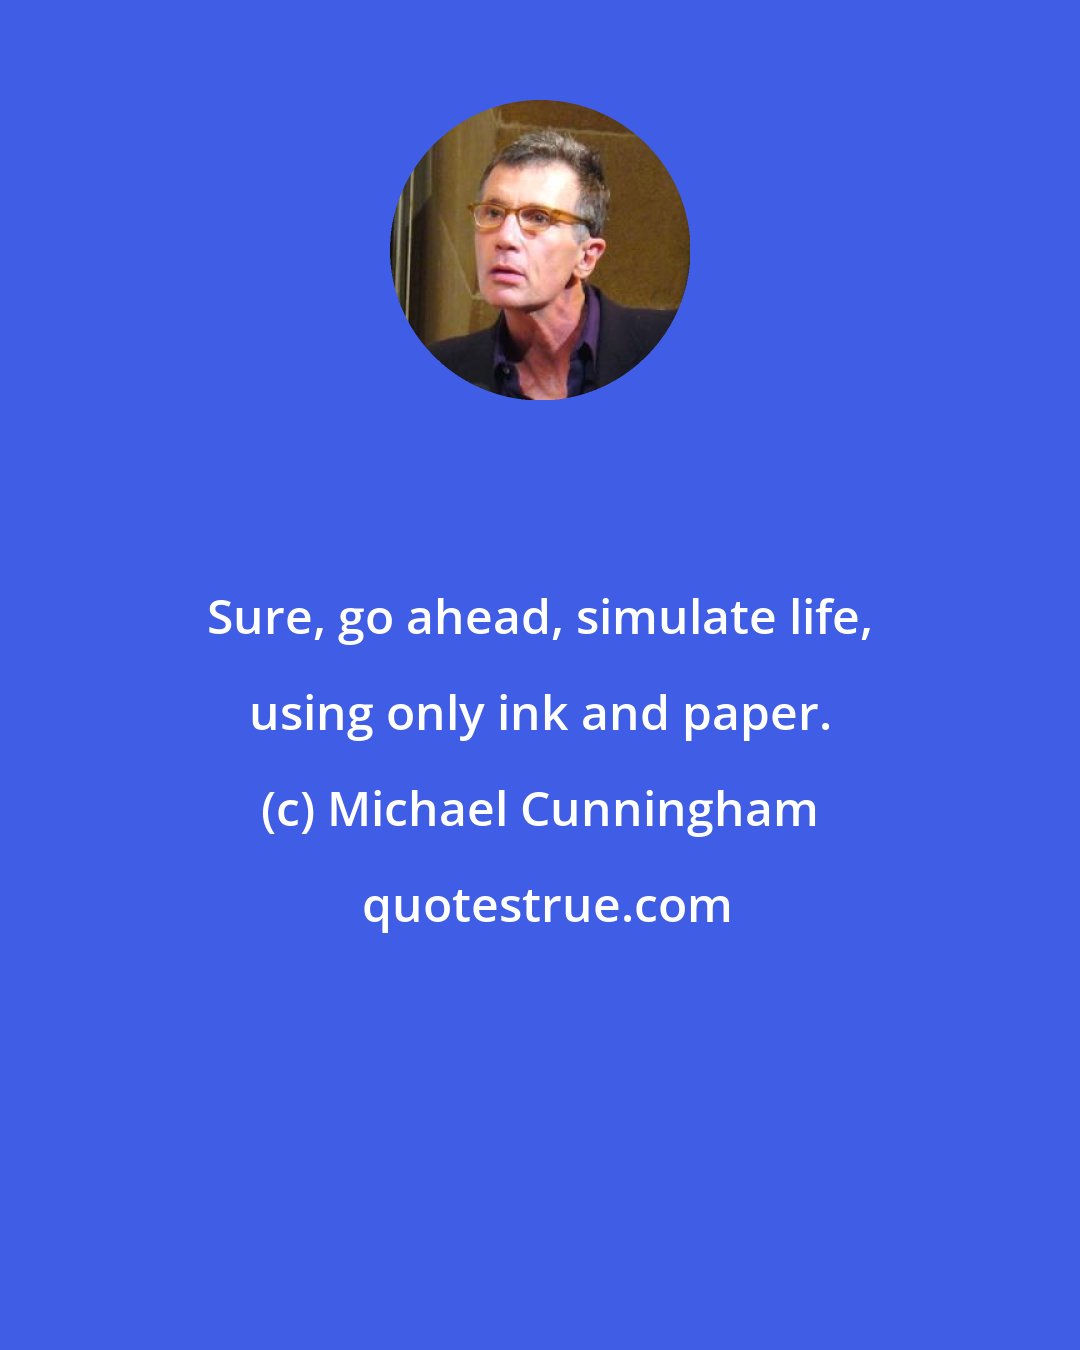 Michael Cunningham: Sure, go ahead, simulate life, using only ink and paper.